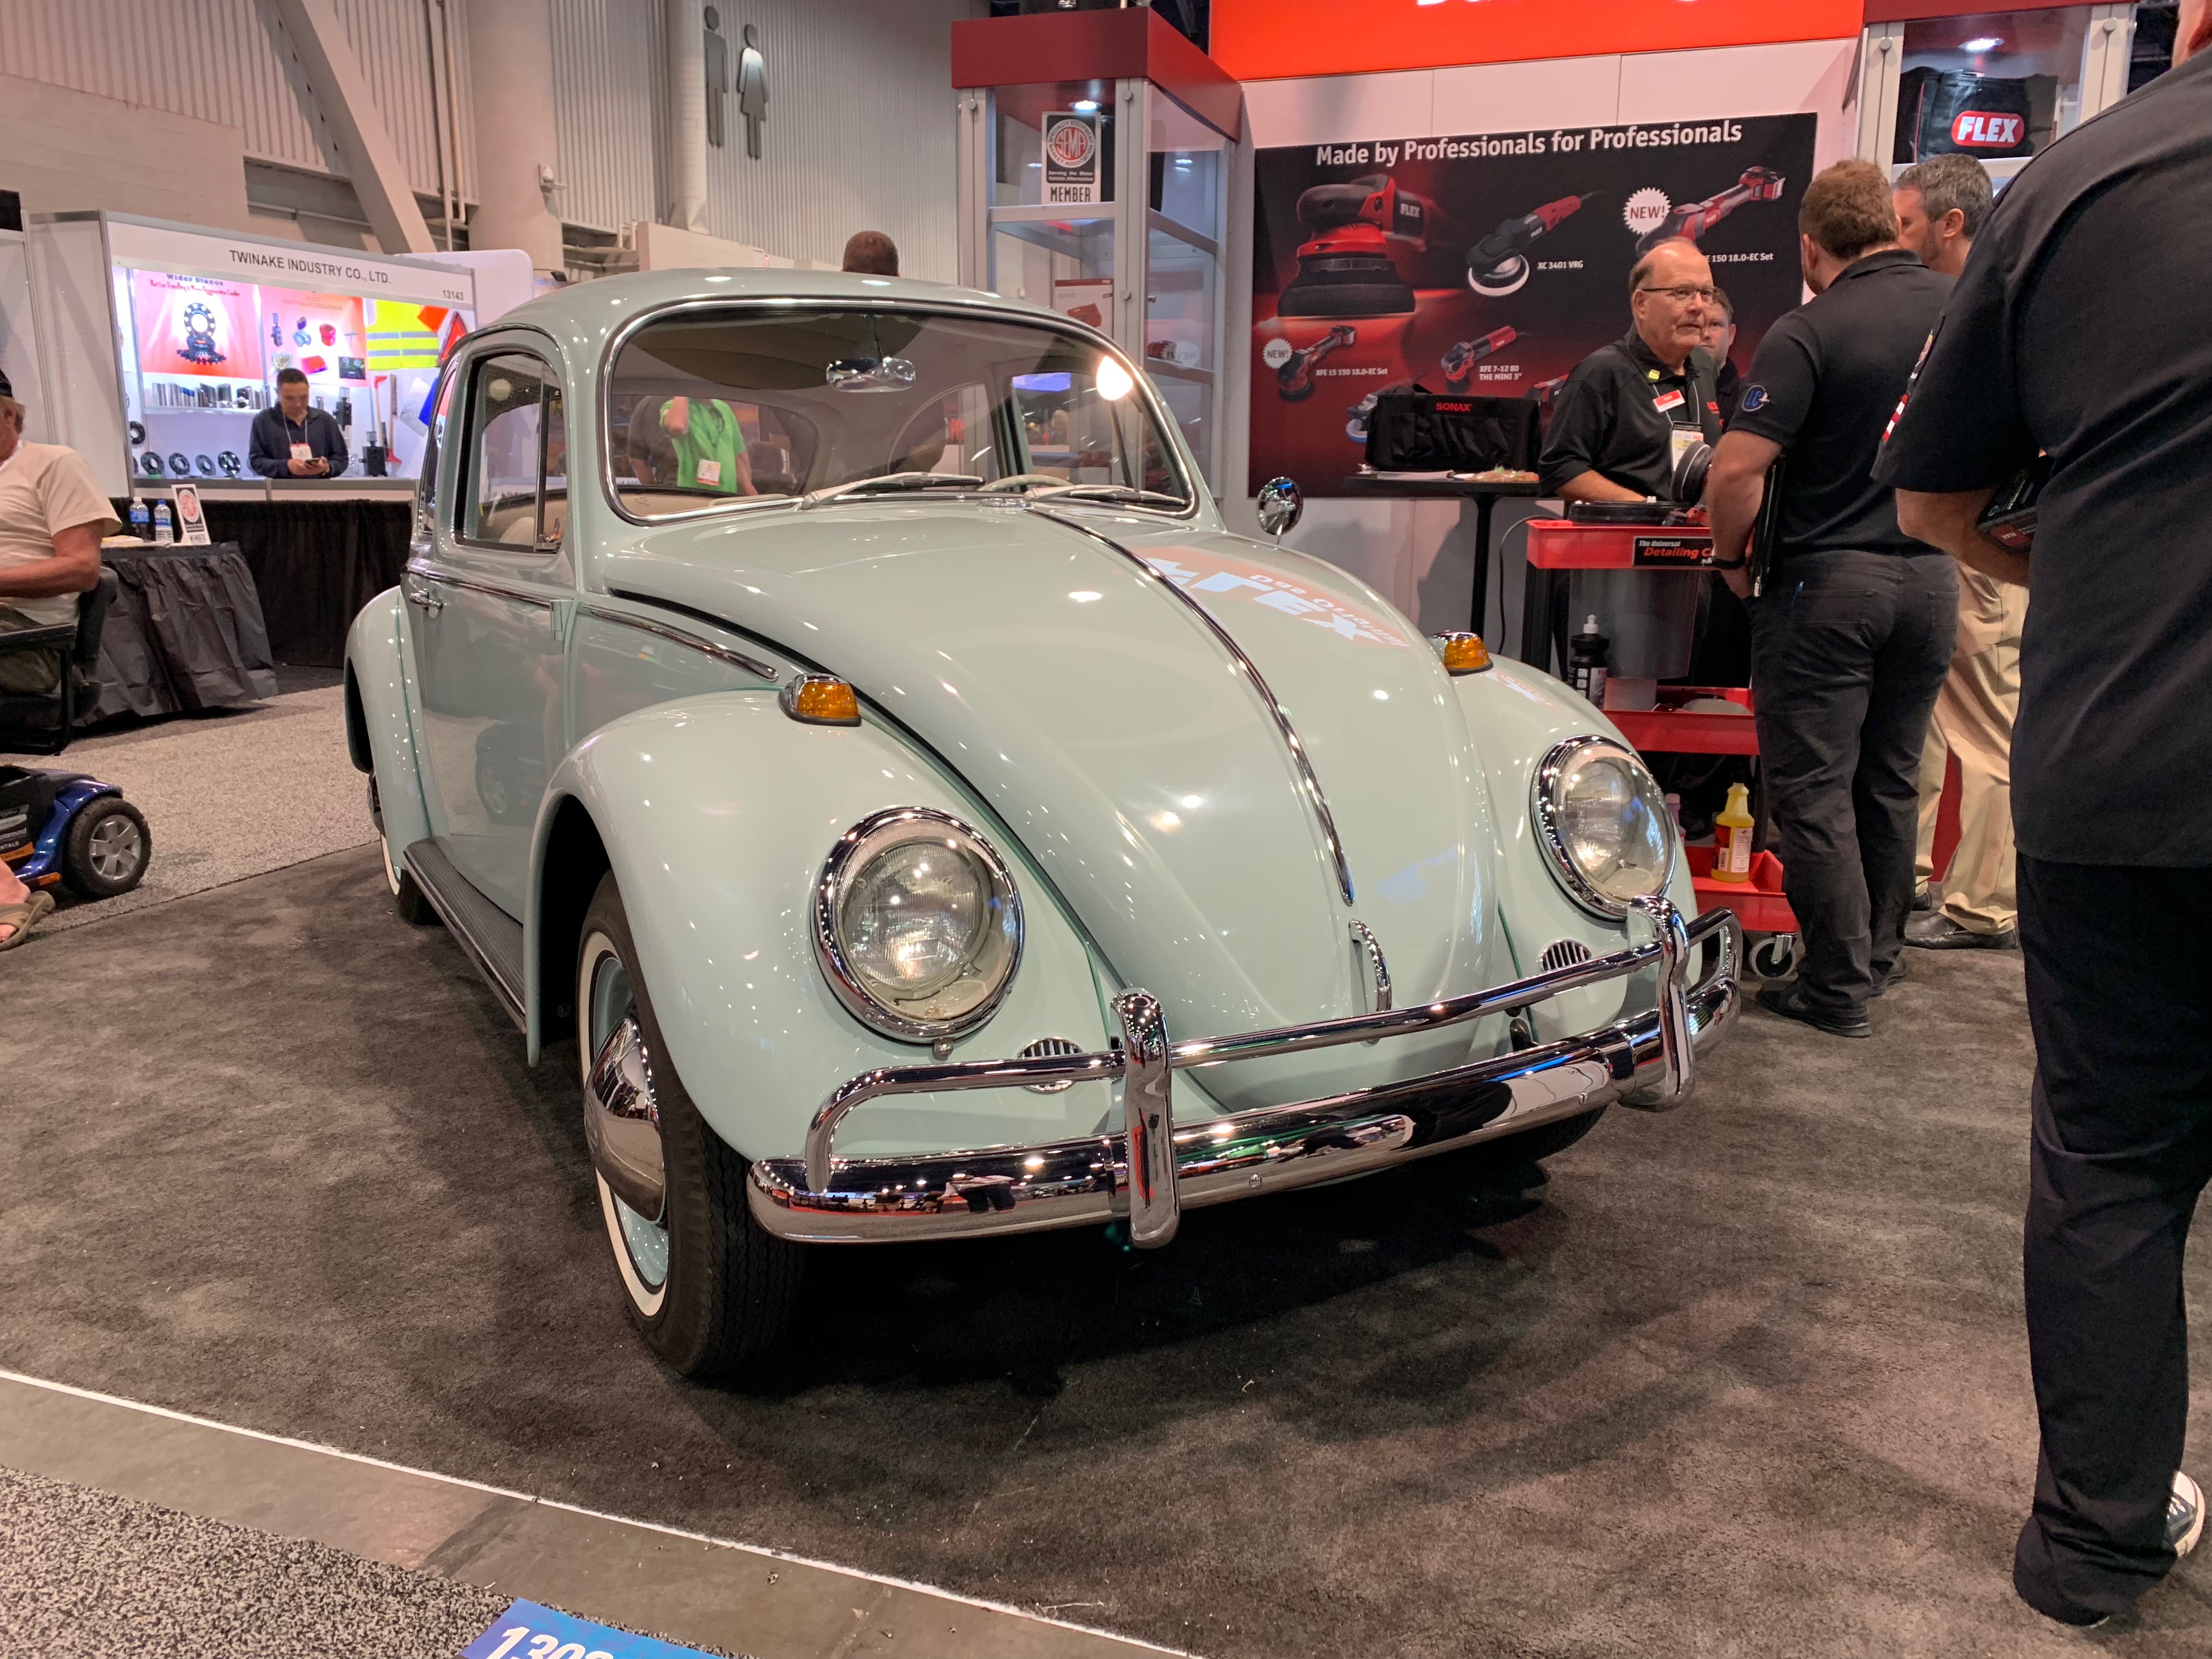 Unlike a lot of cars at SEMA, this lovely Beetle had an actual for-sale sign in the window. | Carter Nacke photo